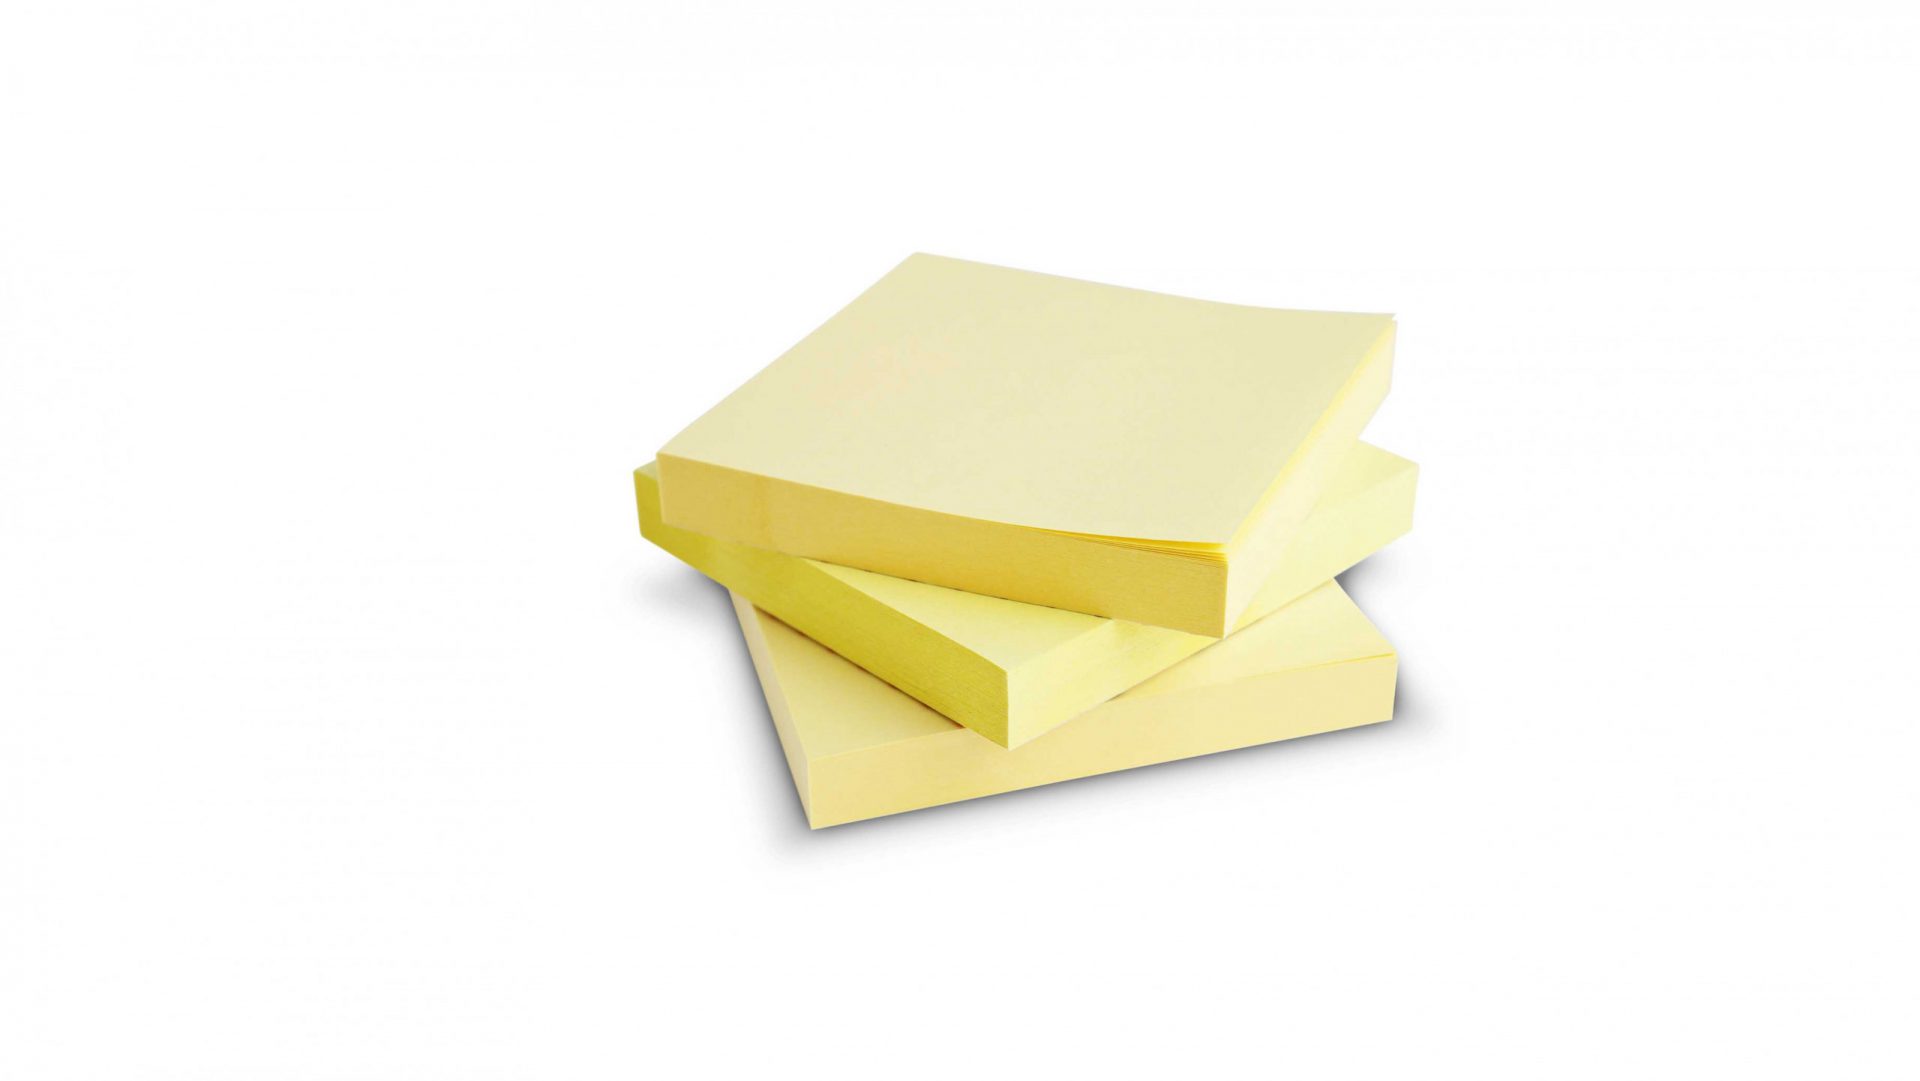 The Post-it : An accidental invention that stuck - DesignWanted :  DesignWanted